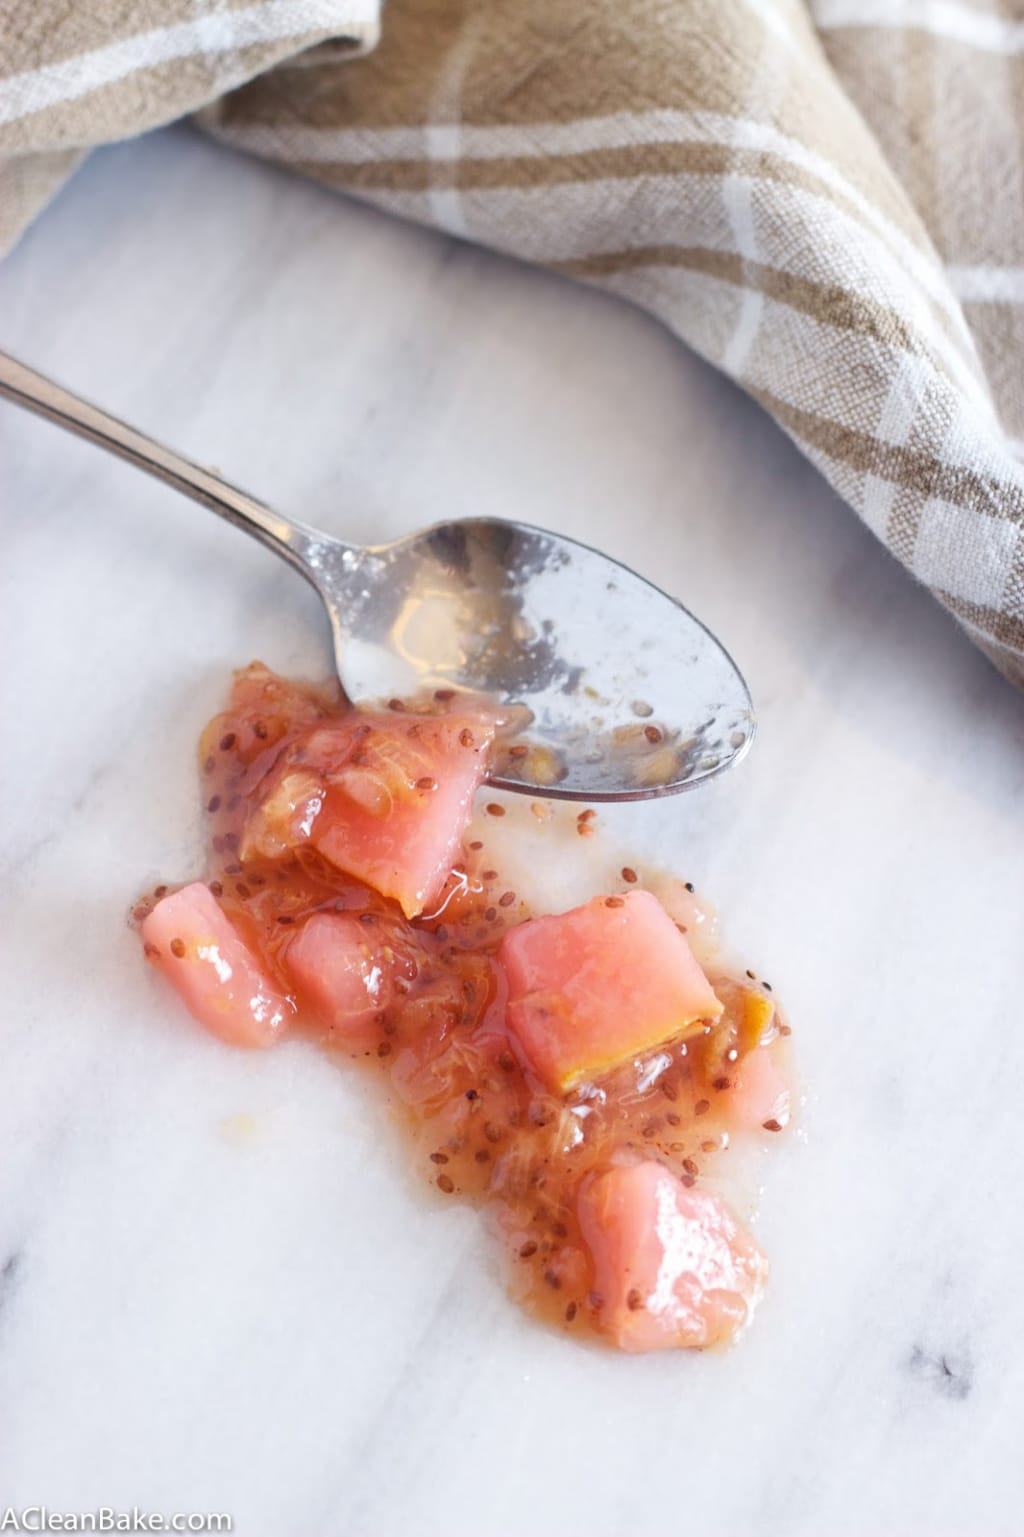 Easy sugar-free plum, pear and chia compote that is great for preserving summer flavors!